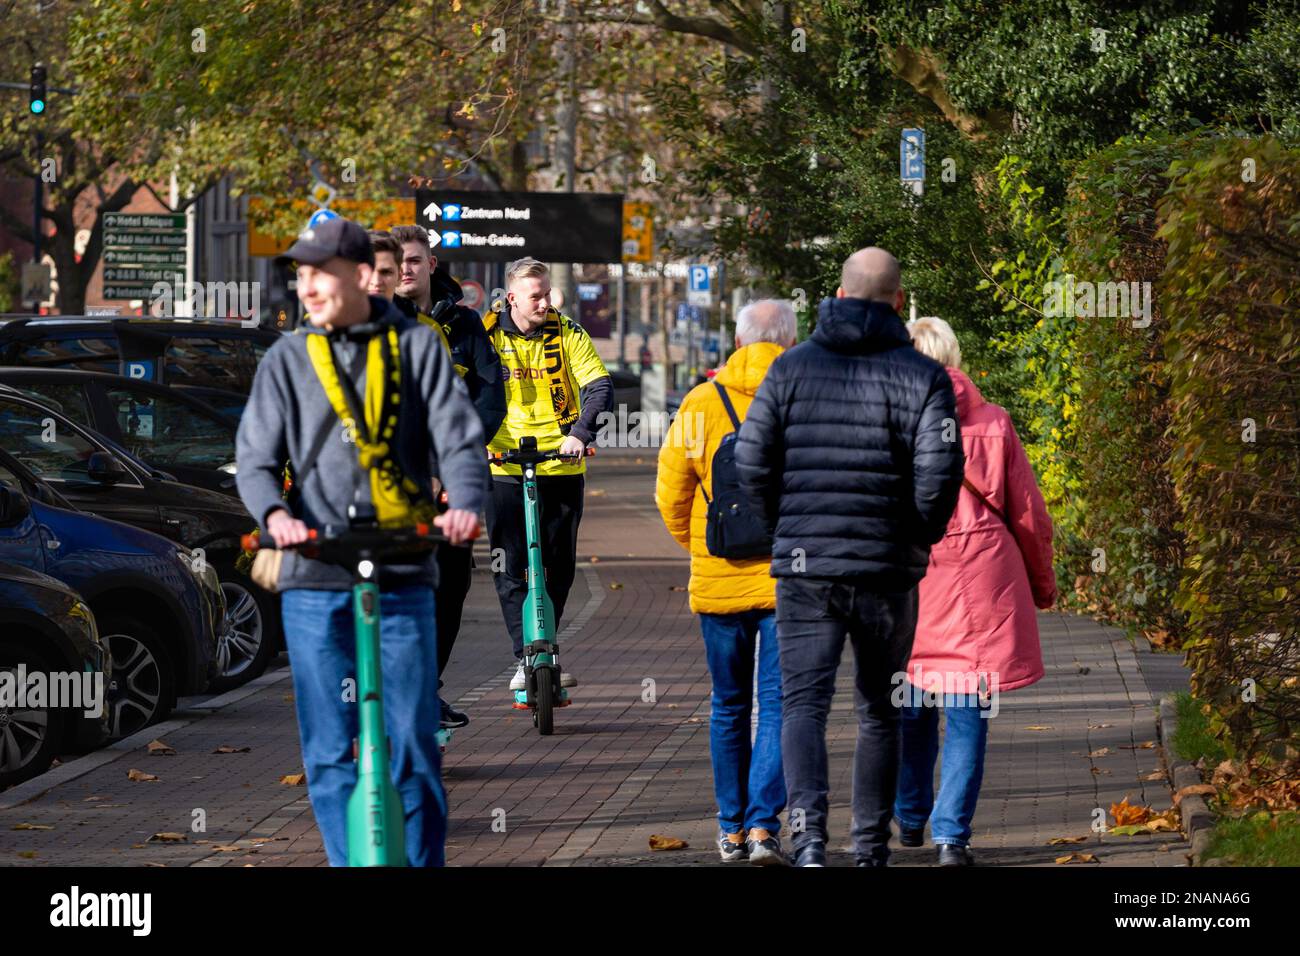 Picture of BVB Borussia Dortmund supporters in Dortmund, Germany, cheering on a electric scooter while going to the footbal stadium of the city. Balls Stock Photo